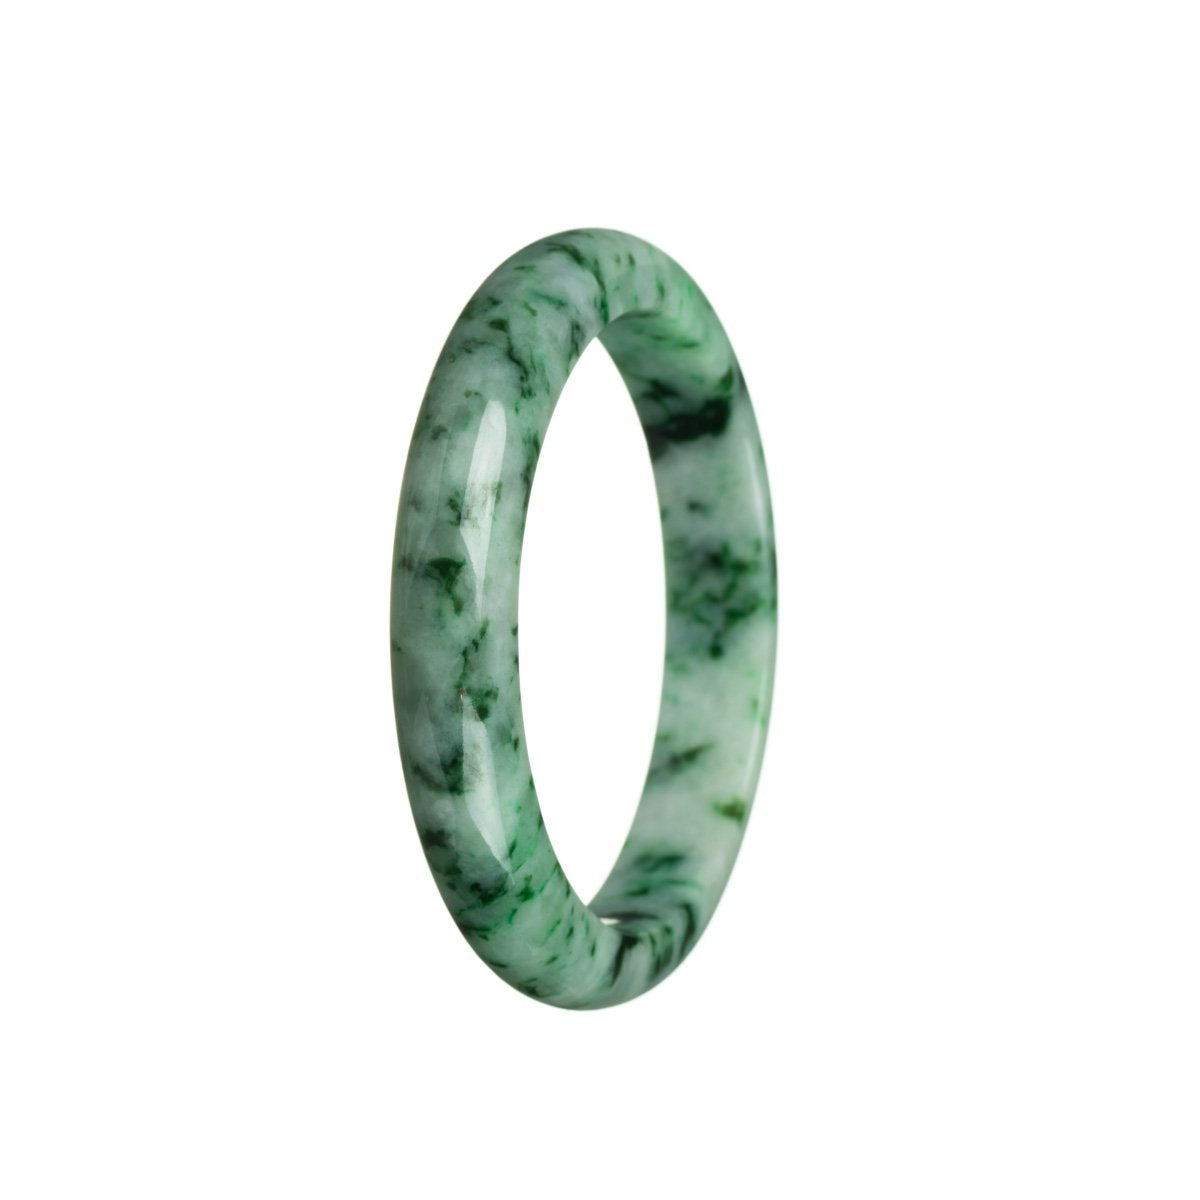 Image of a stunning Grade A Green Burma Jade bangle, measuring 55mm in diameter. The bangle is semi-round in shape and is certified for its exceptional quality. The vibrant green color of the jade exudes elegance and sophistication. A perfect accessory for those who appreciate the beauty of natural gemstones.